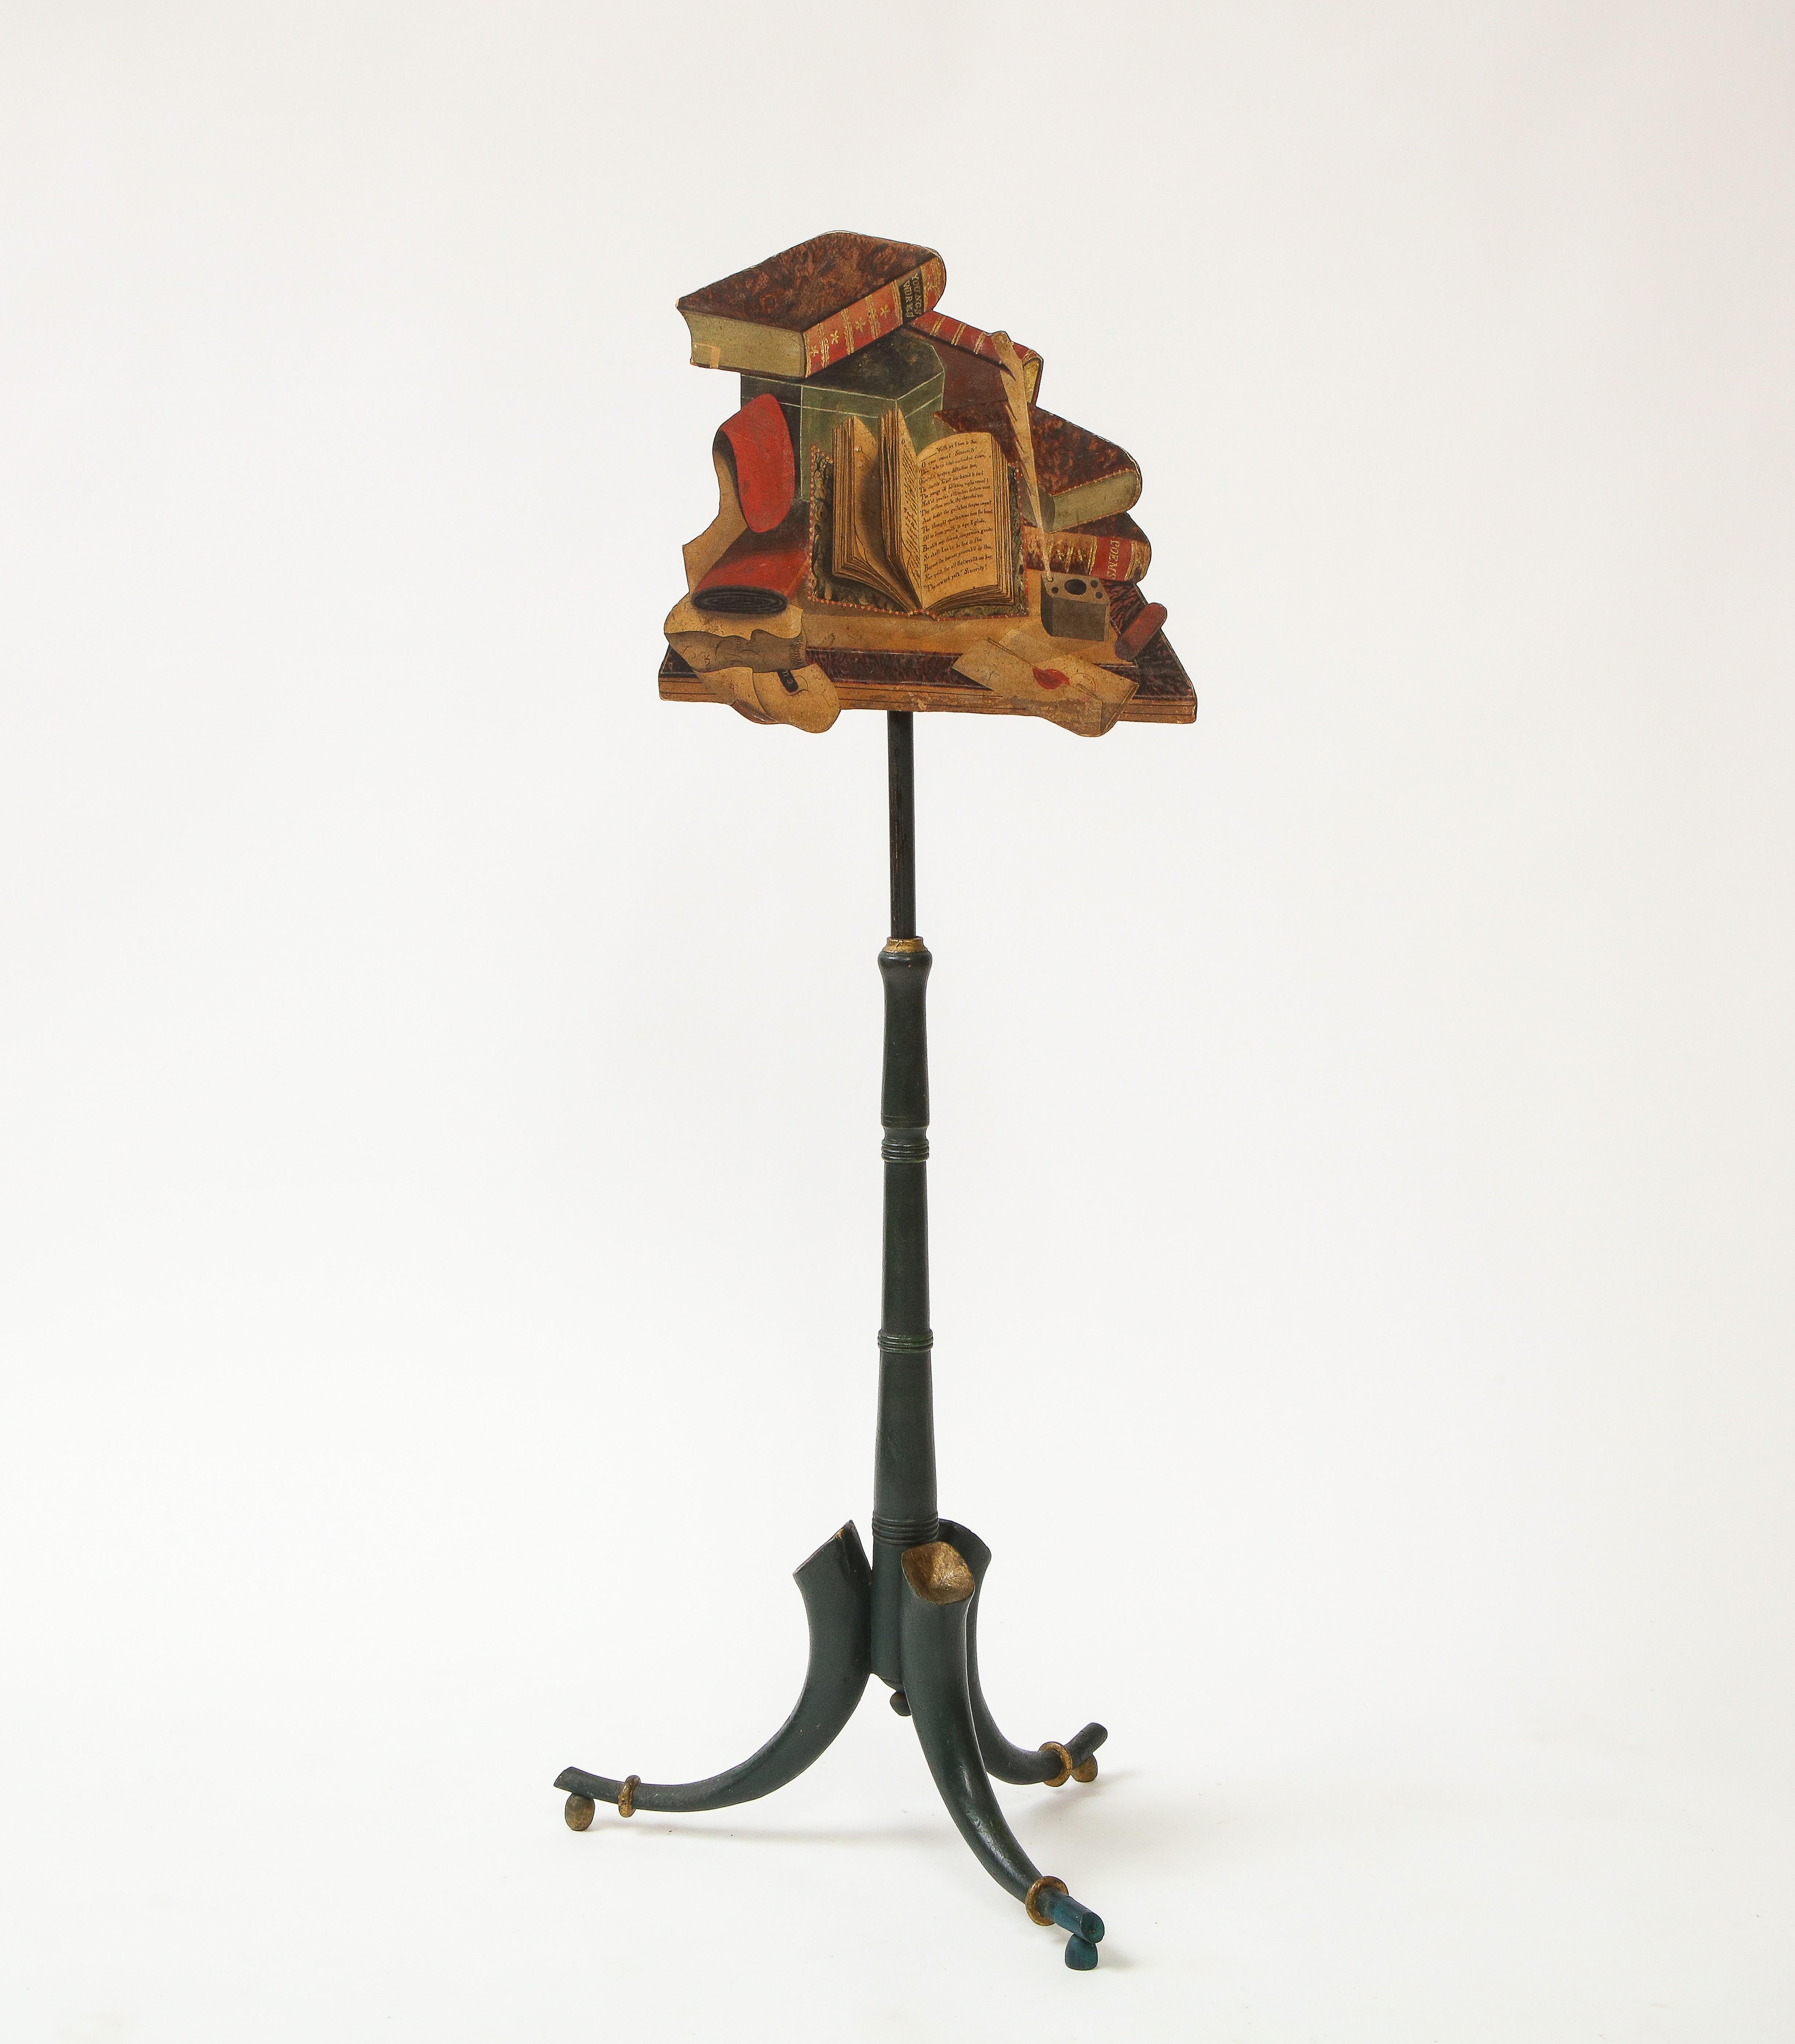 Featuring a trompe l'oeil screen depicting antique books of poetry, an inkwell with plume, wax-sealed letters and papers. Mounted on a dark-teal painted metal stand, ending in horn-shaped feet on raised gilt balls.